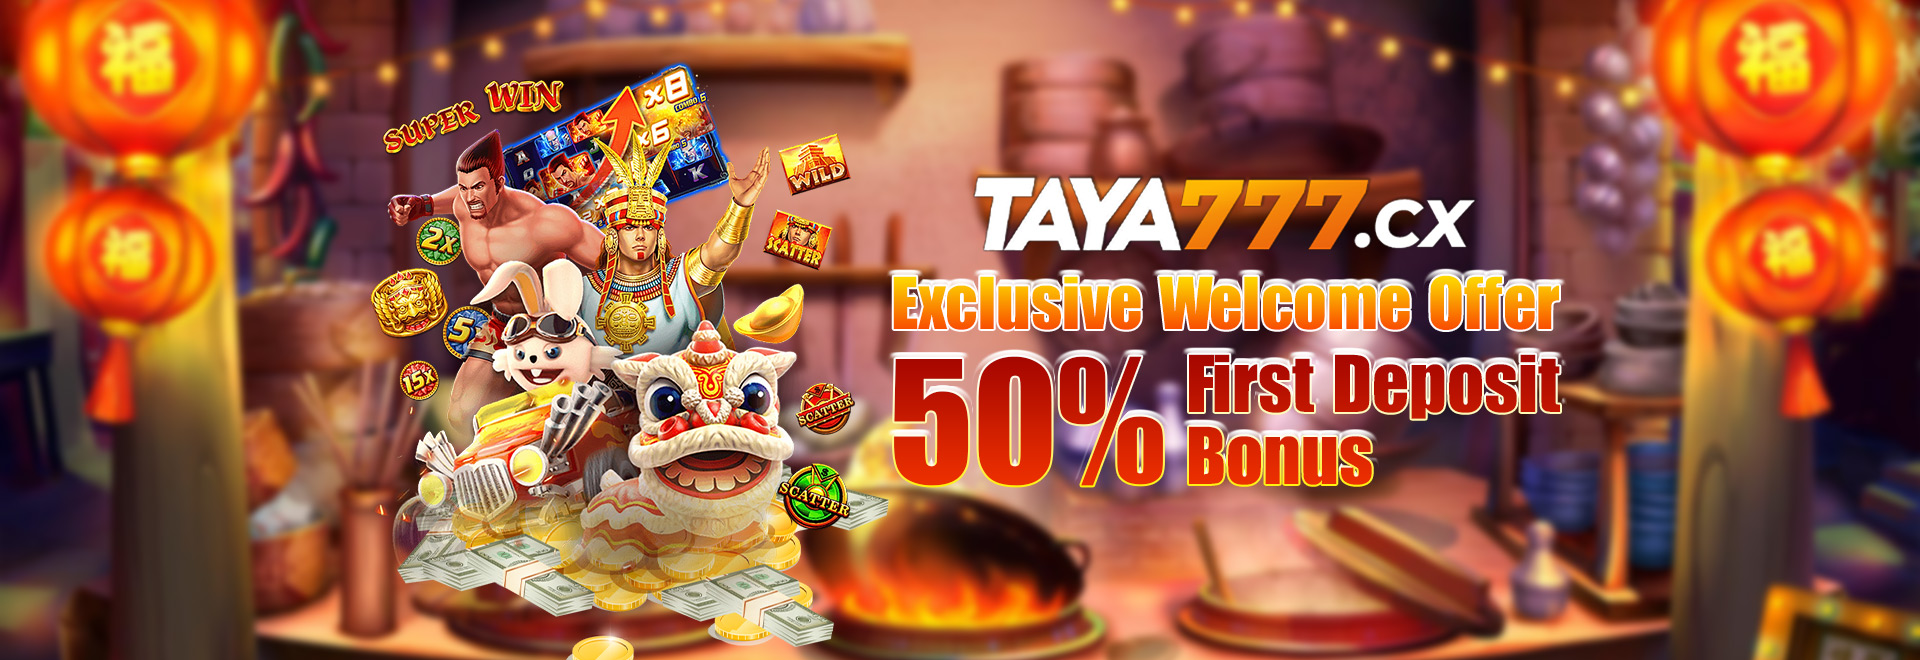 taya777 exclusive welcome offer